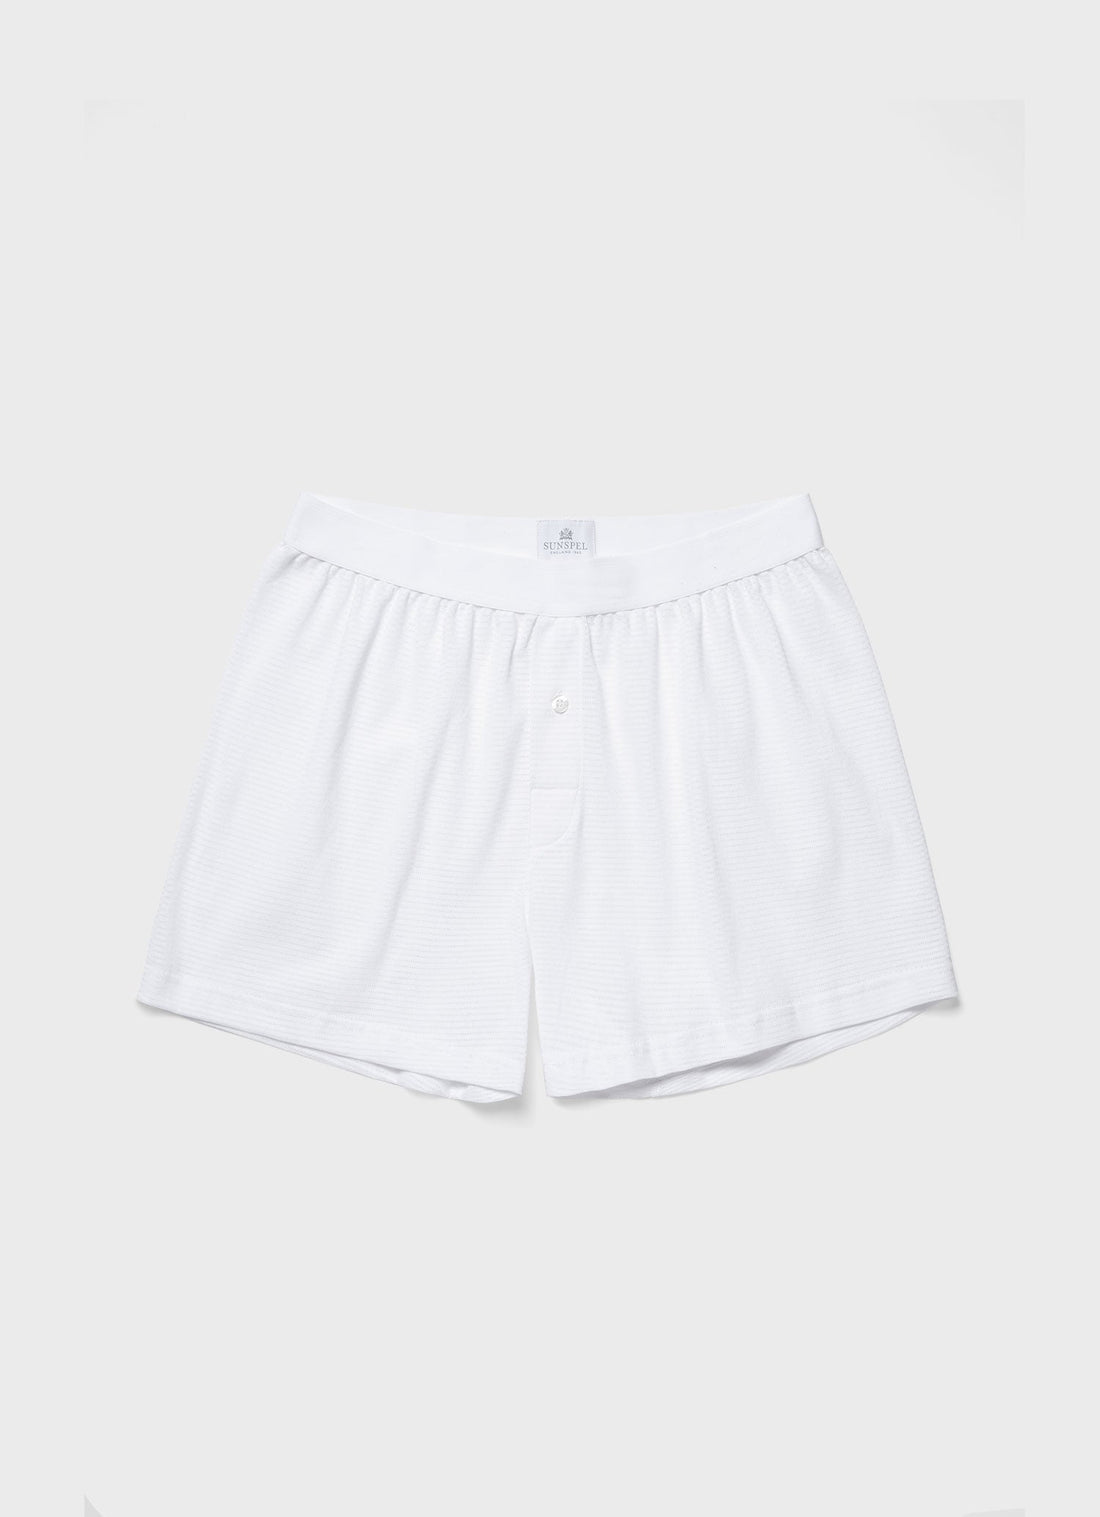 Men's Cellular Cotton One-Button Shorts in White